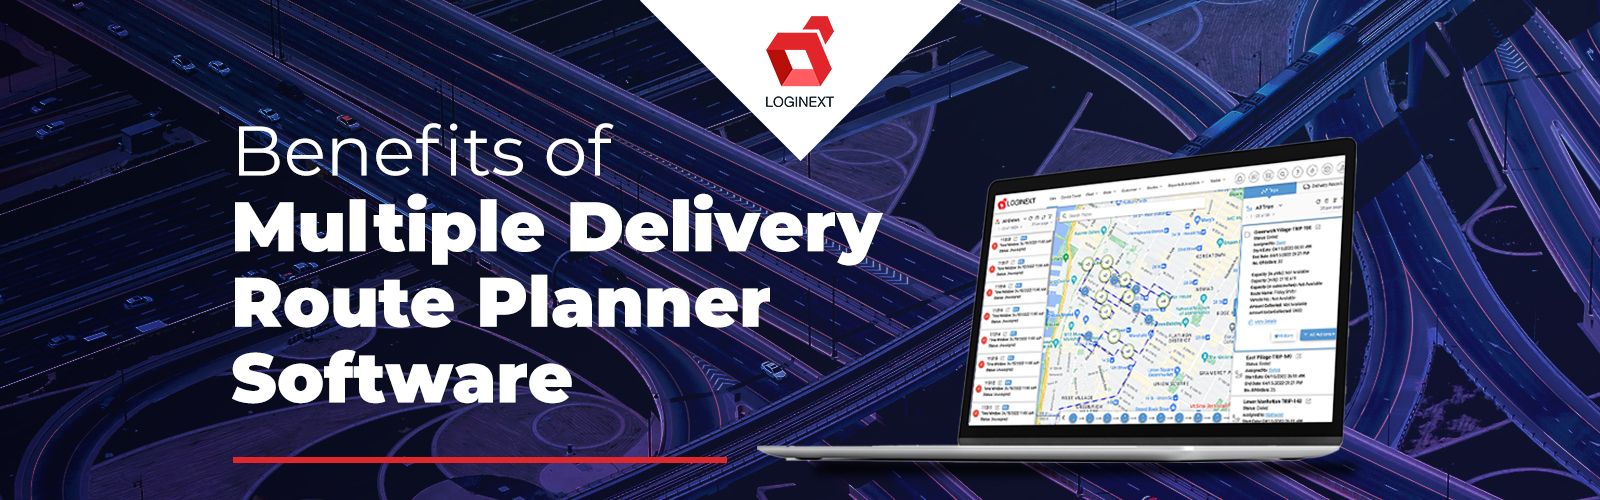 Benefits of Multiple Delivery Route Planner Software